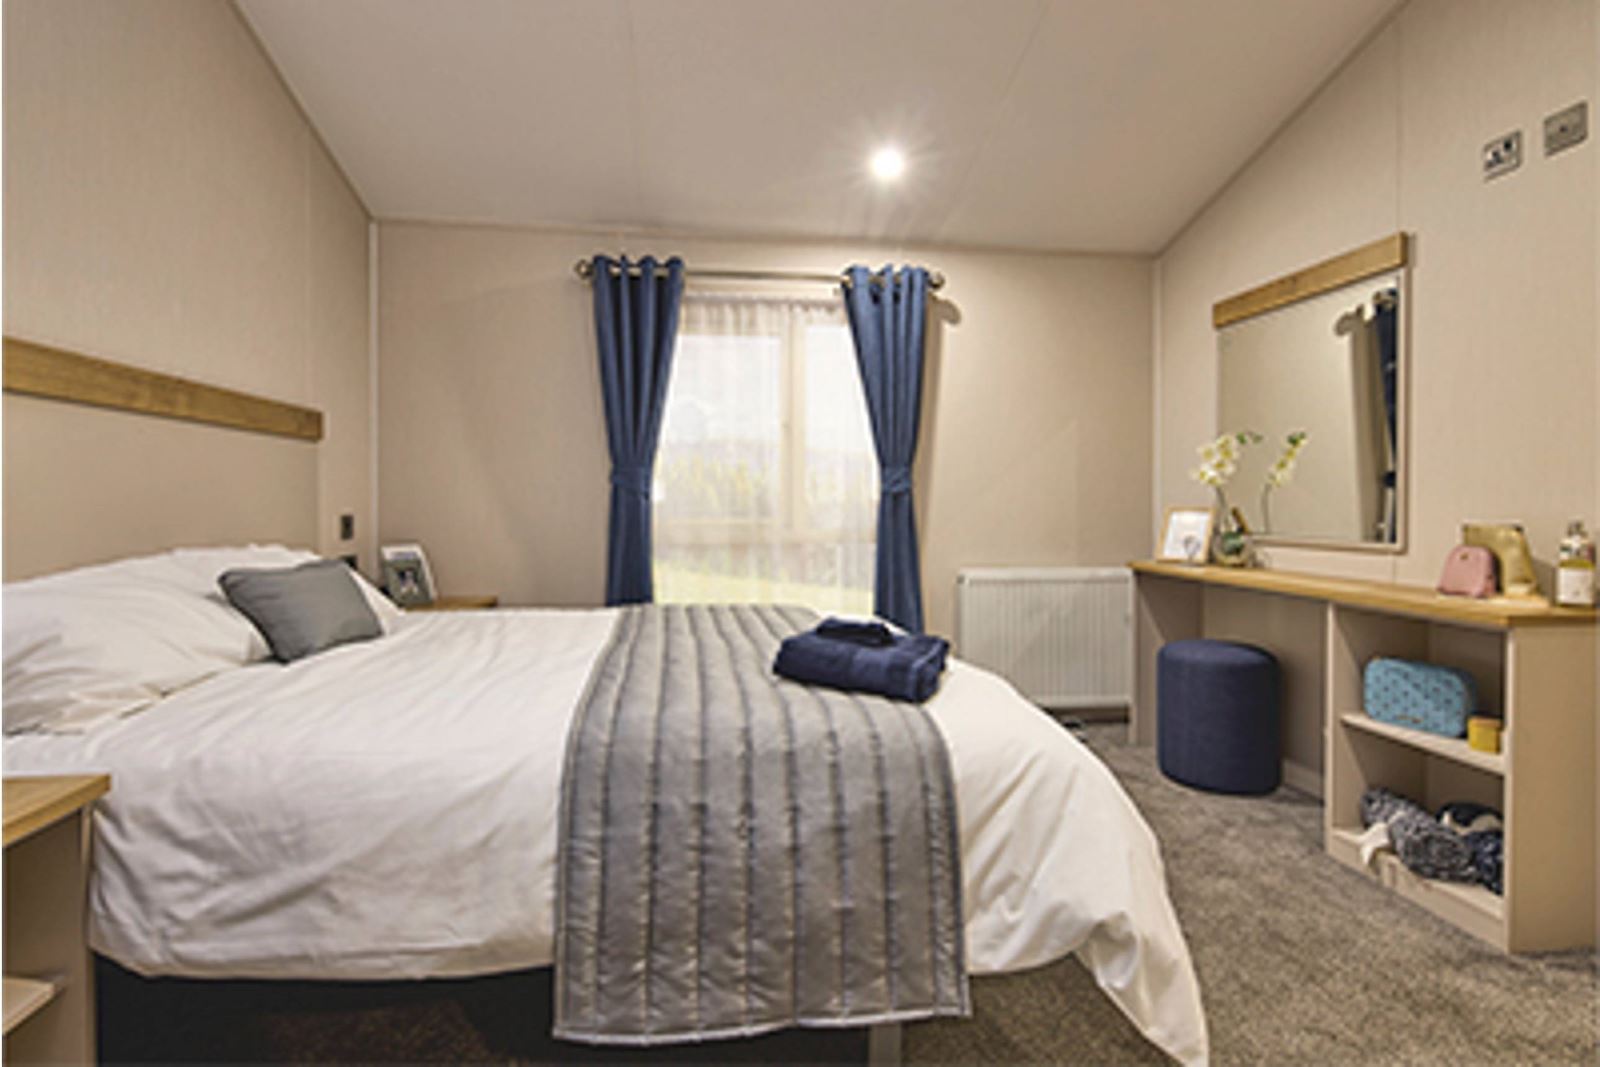 The bedroom inside the Willerby Hayward